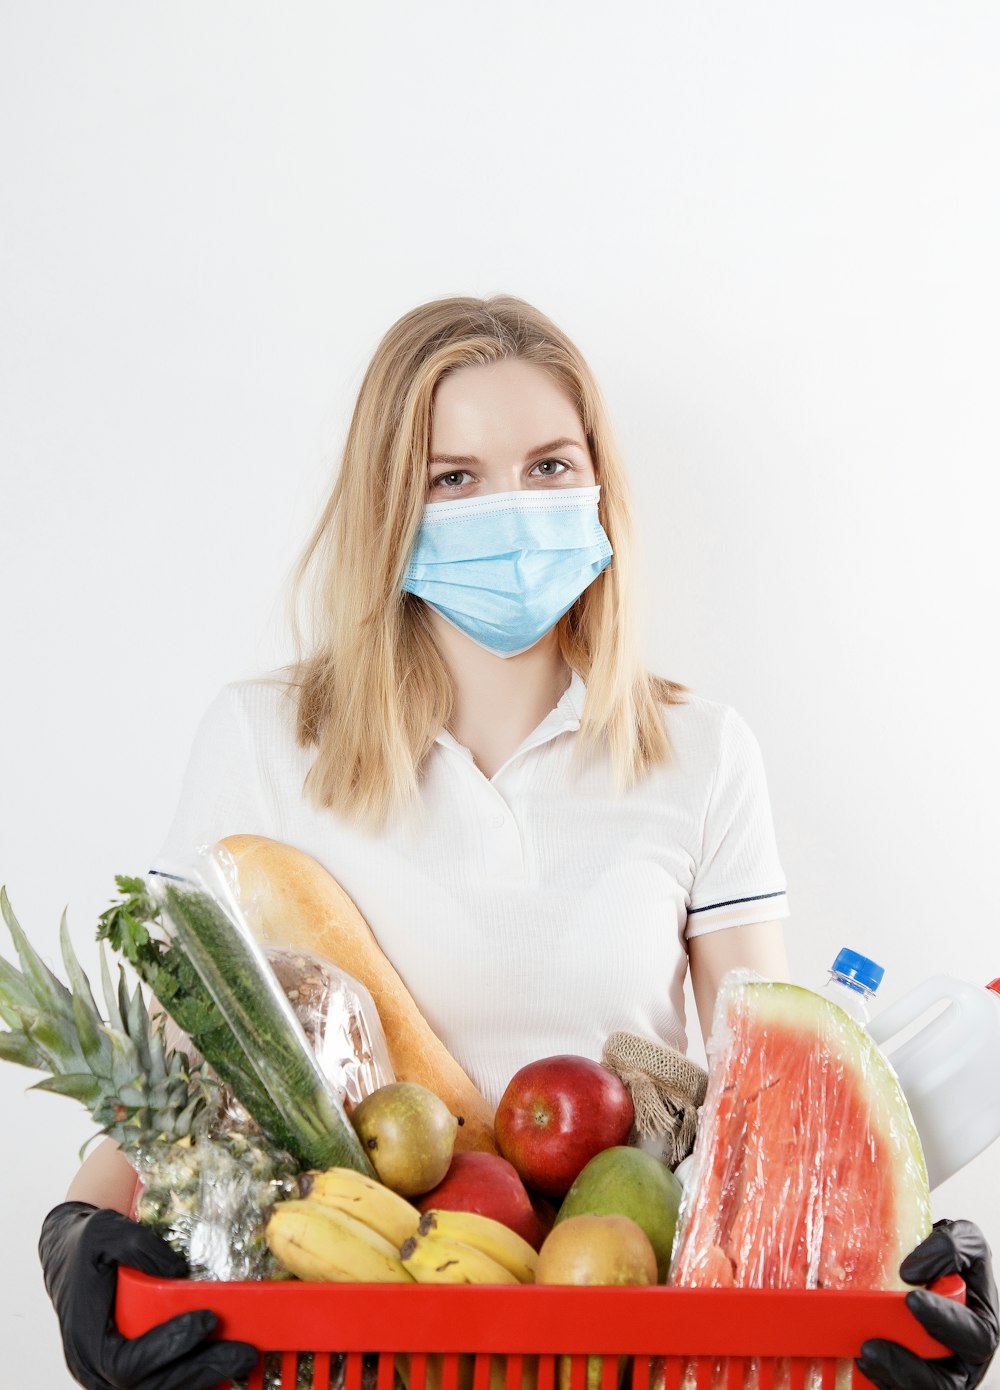 A blonde white woman holding a basked full of groceries, mainly fruits and vegetables. She is wearing a COVID-19 face mask, black gloves, and a white polo shirt.